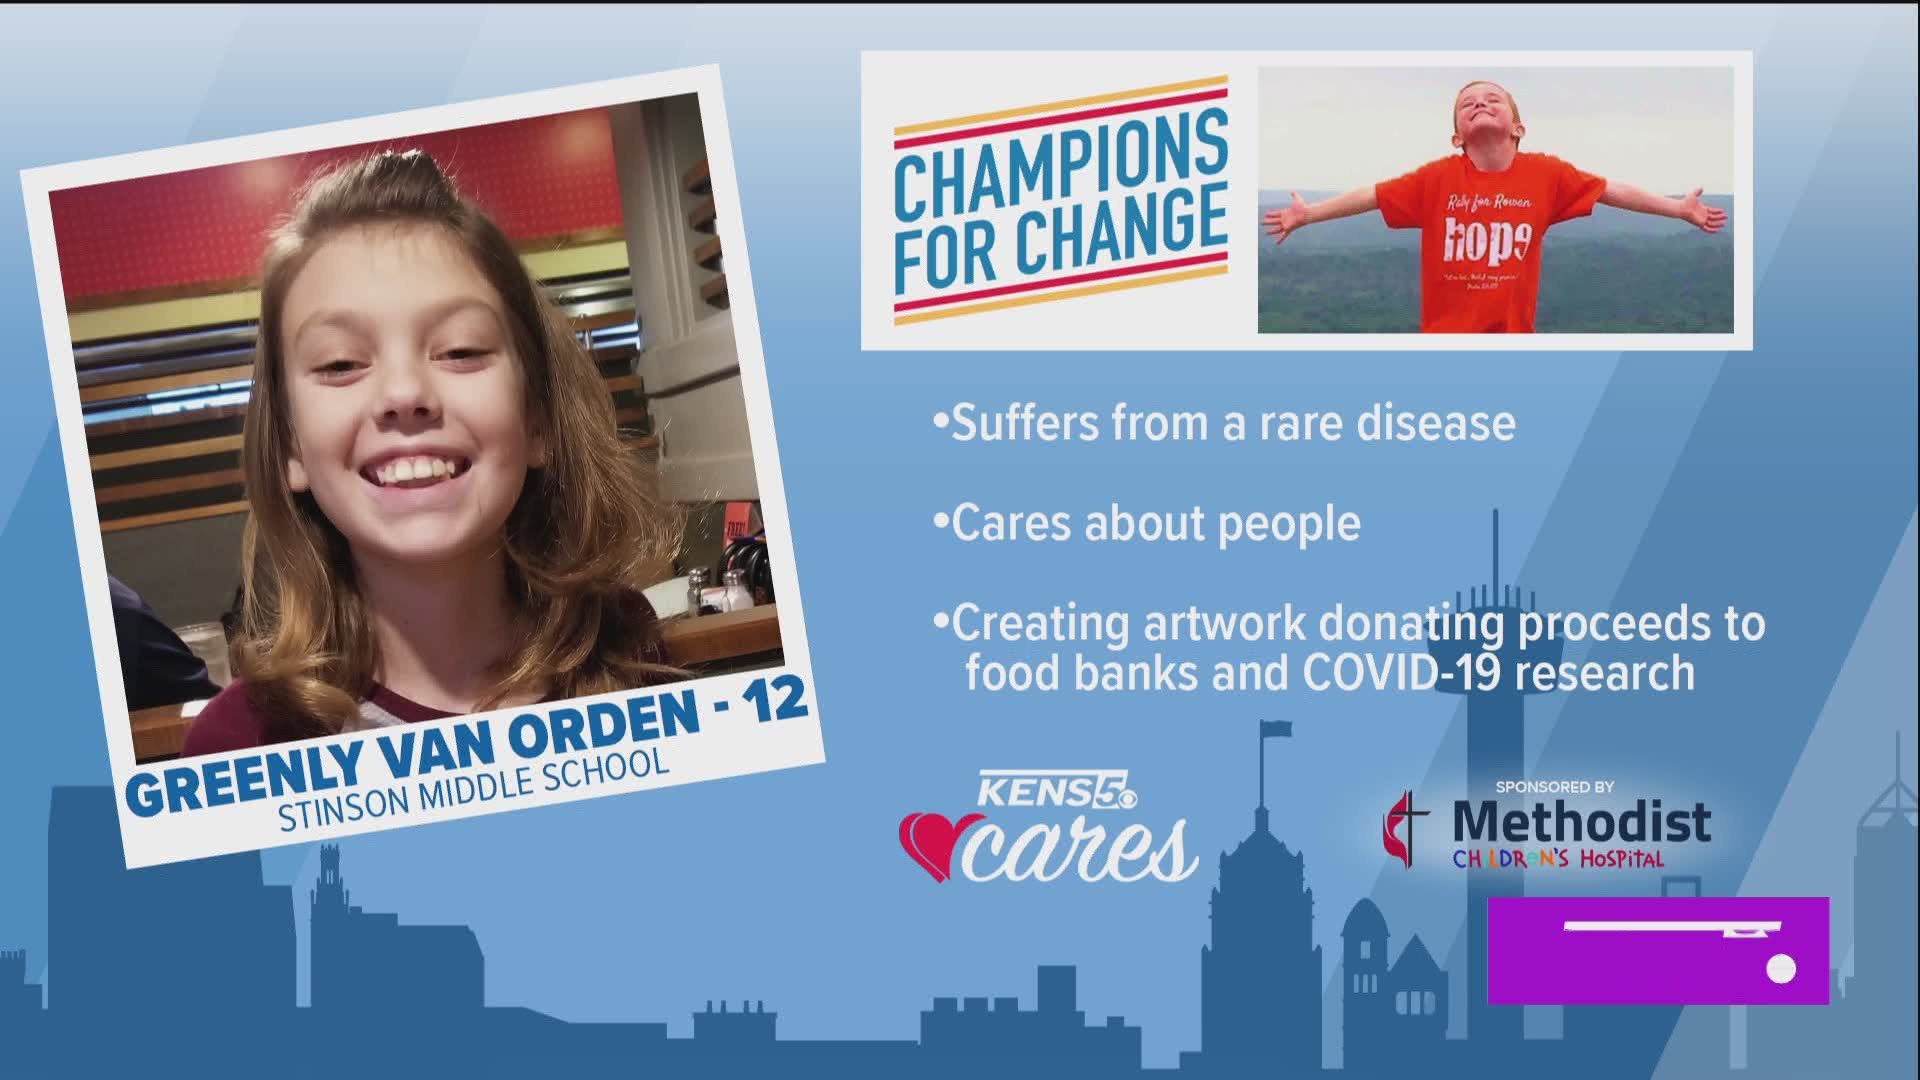 Our Champion for Change Greenly Van Orden suffers from a rare disease that limits her ability to write. But she is a fighter and doesn't let it hold her back.